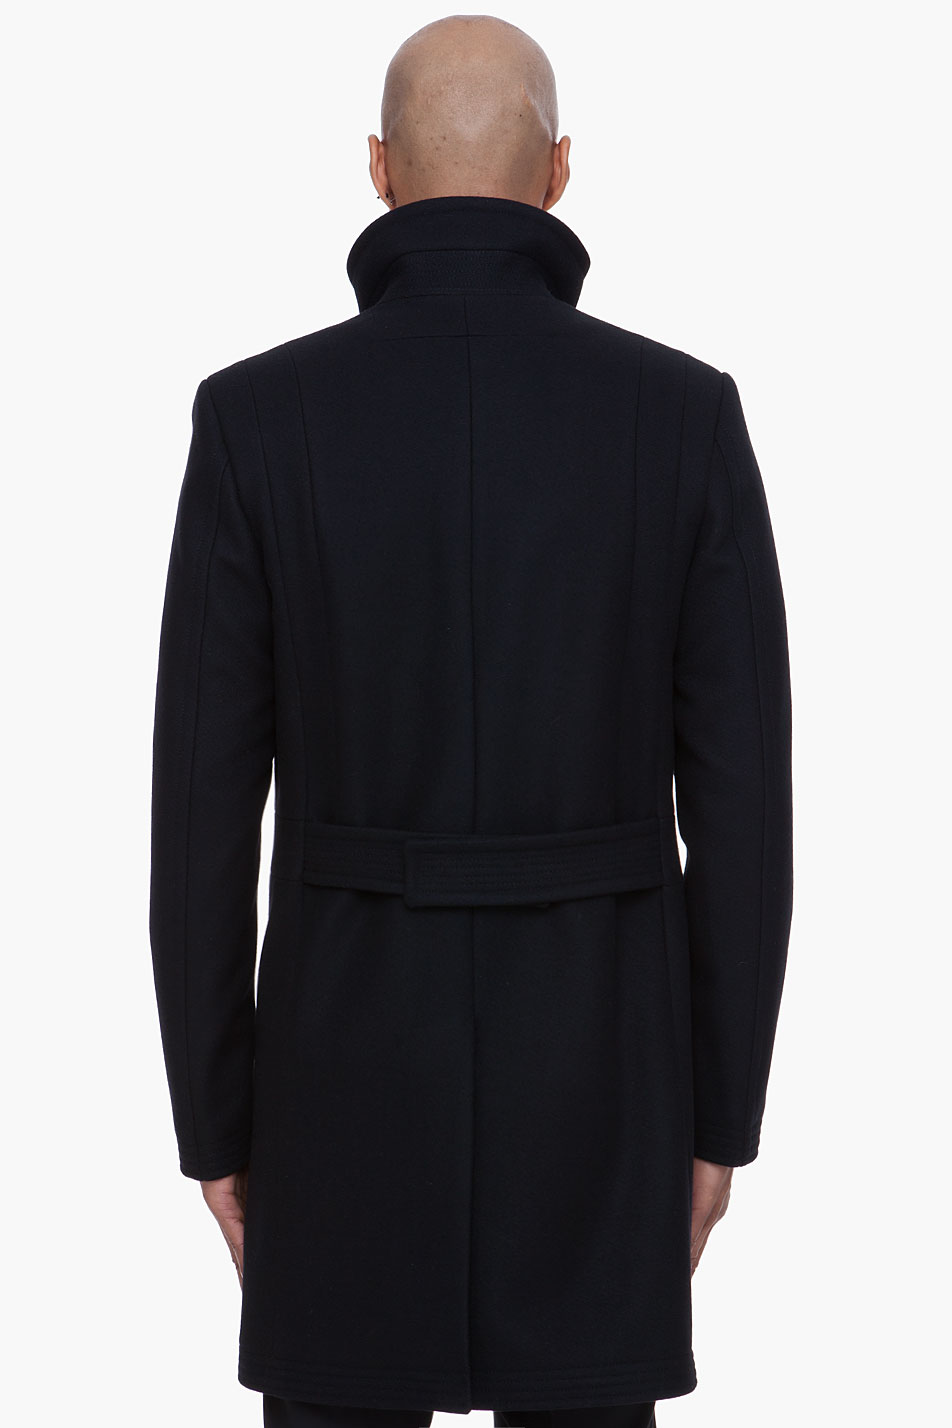 Lyst - Givenchy Wool Cashmere Officer Coat in Black for Men